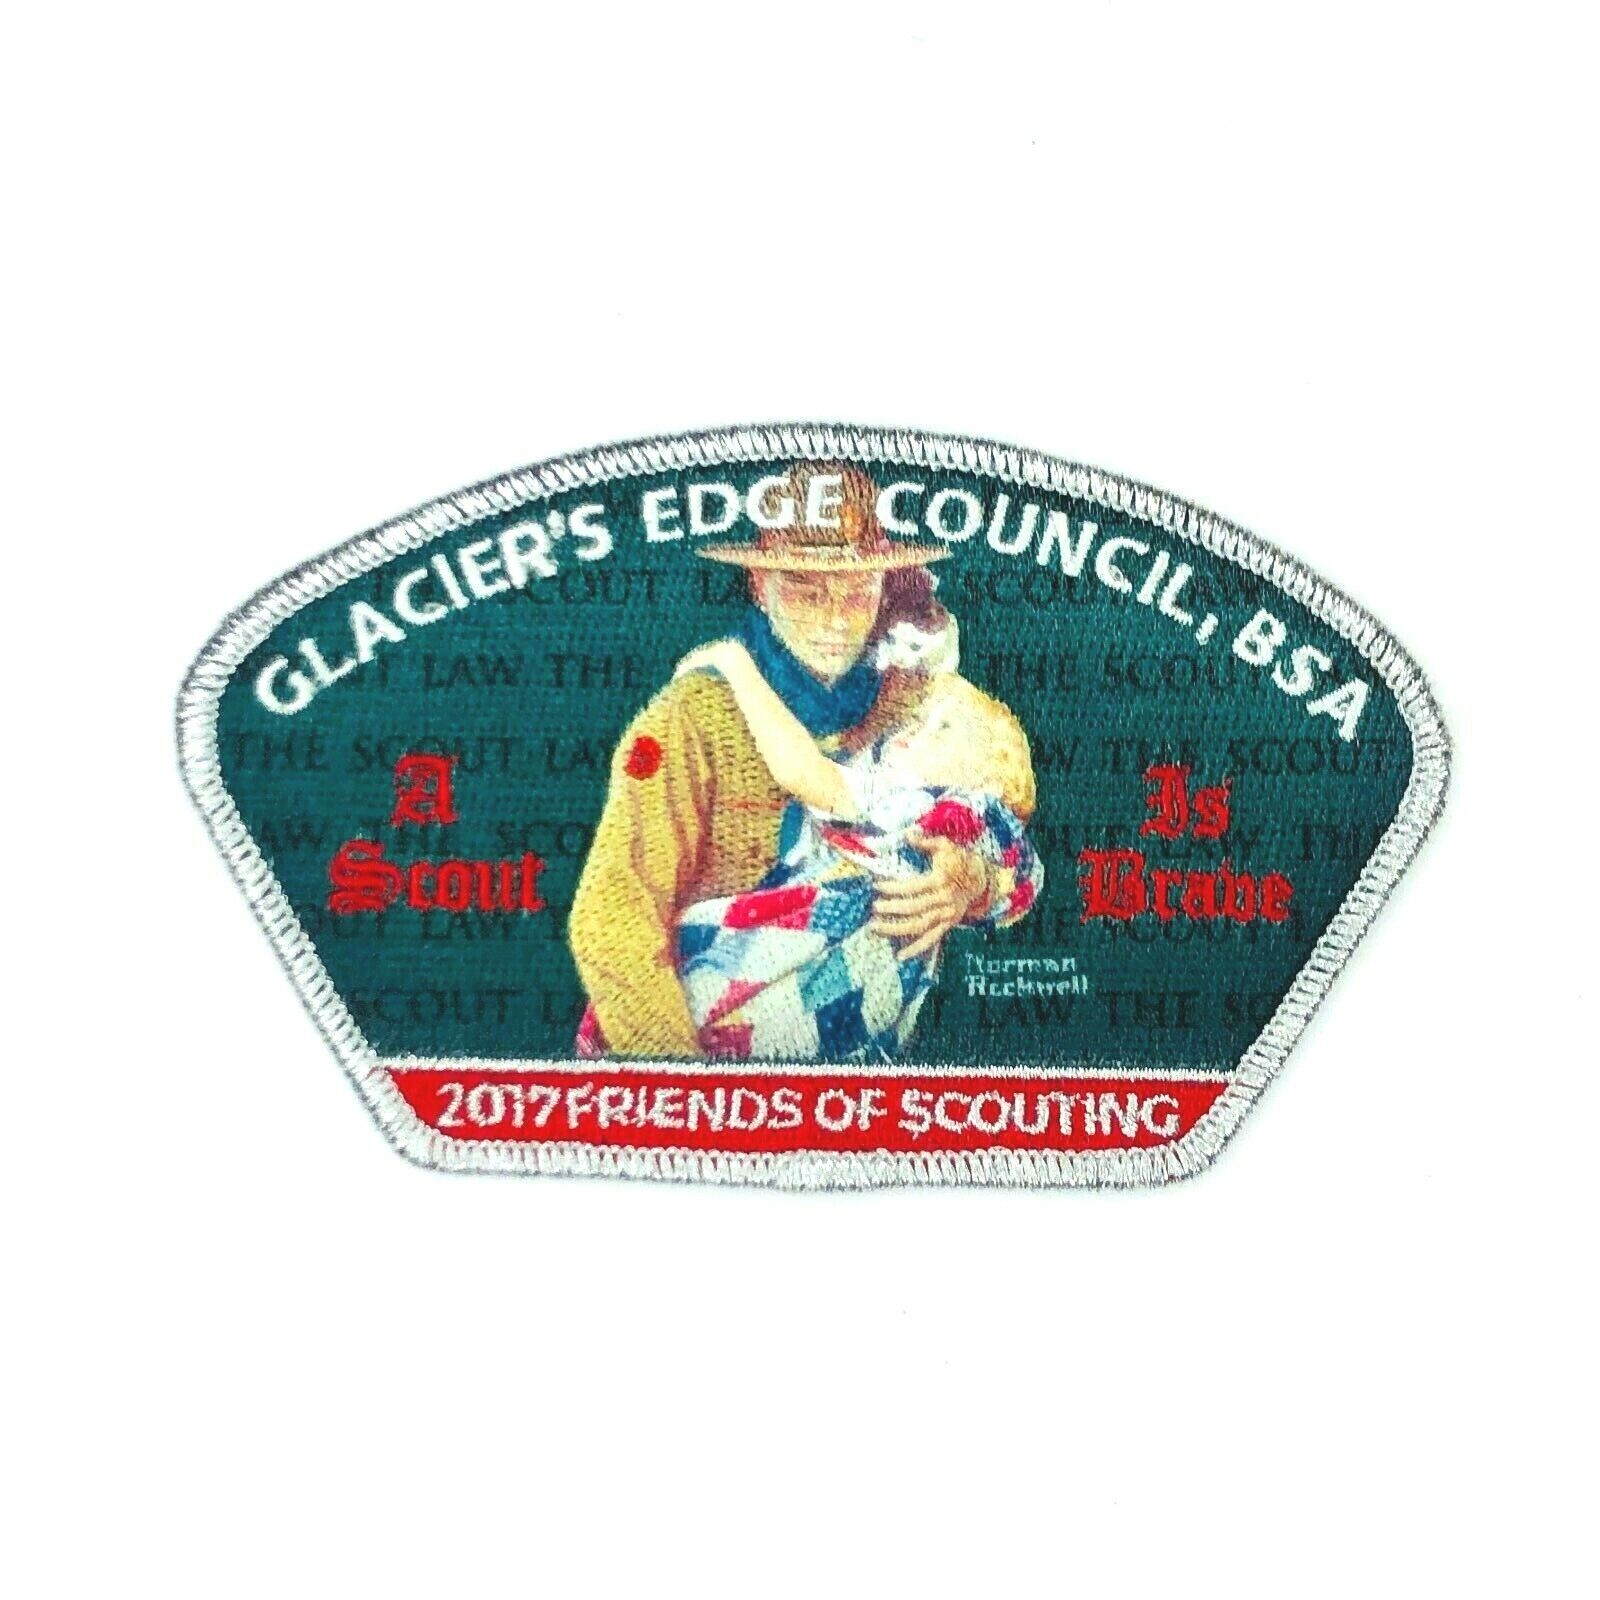 Brave 2017 Friends of Scouting FOS Glacier\'s Edge Council CSP Patch Wisconsin